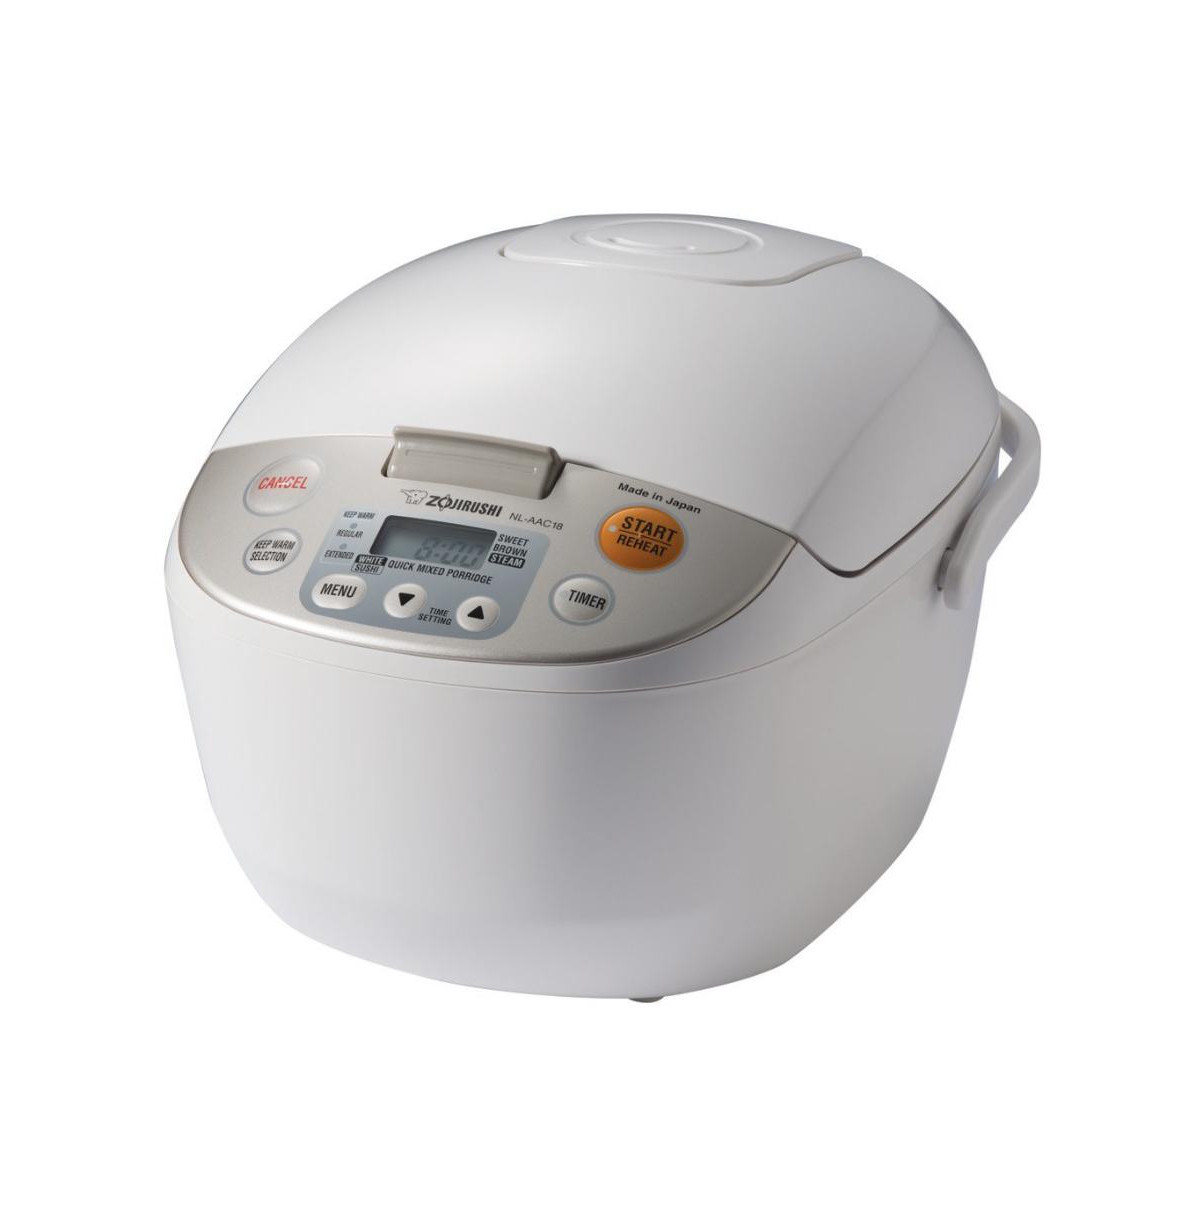 Micom Rice Cooker And Warmer - White